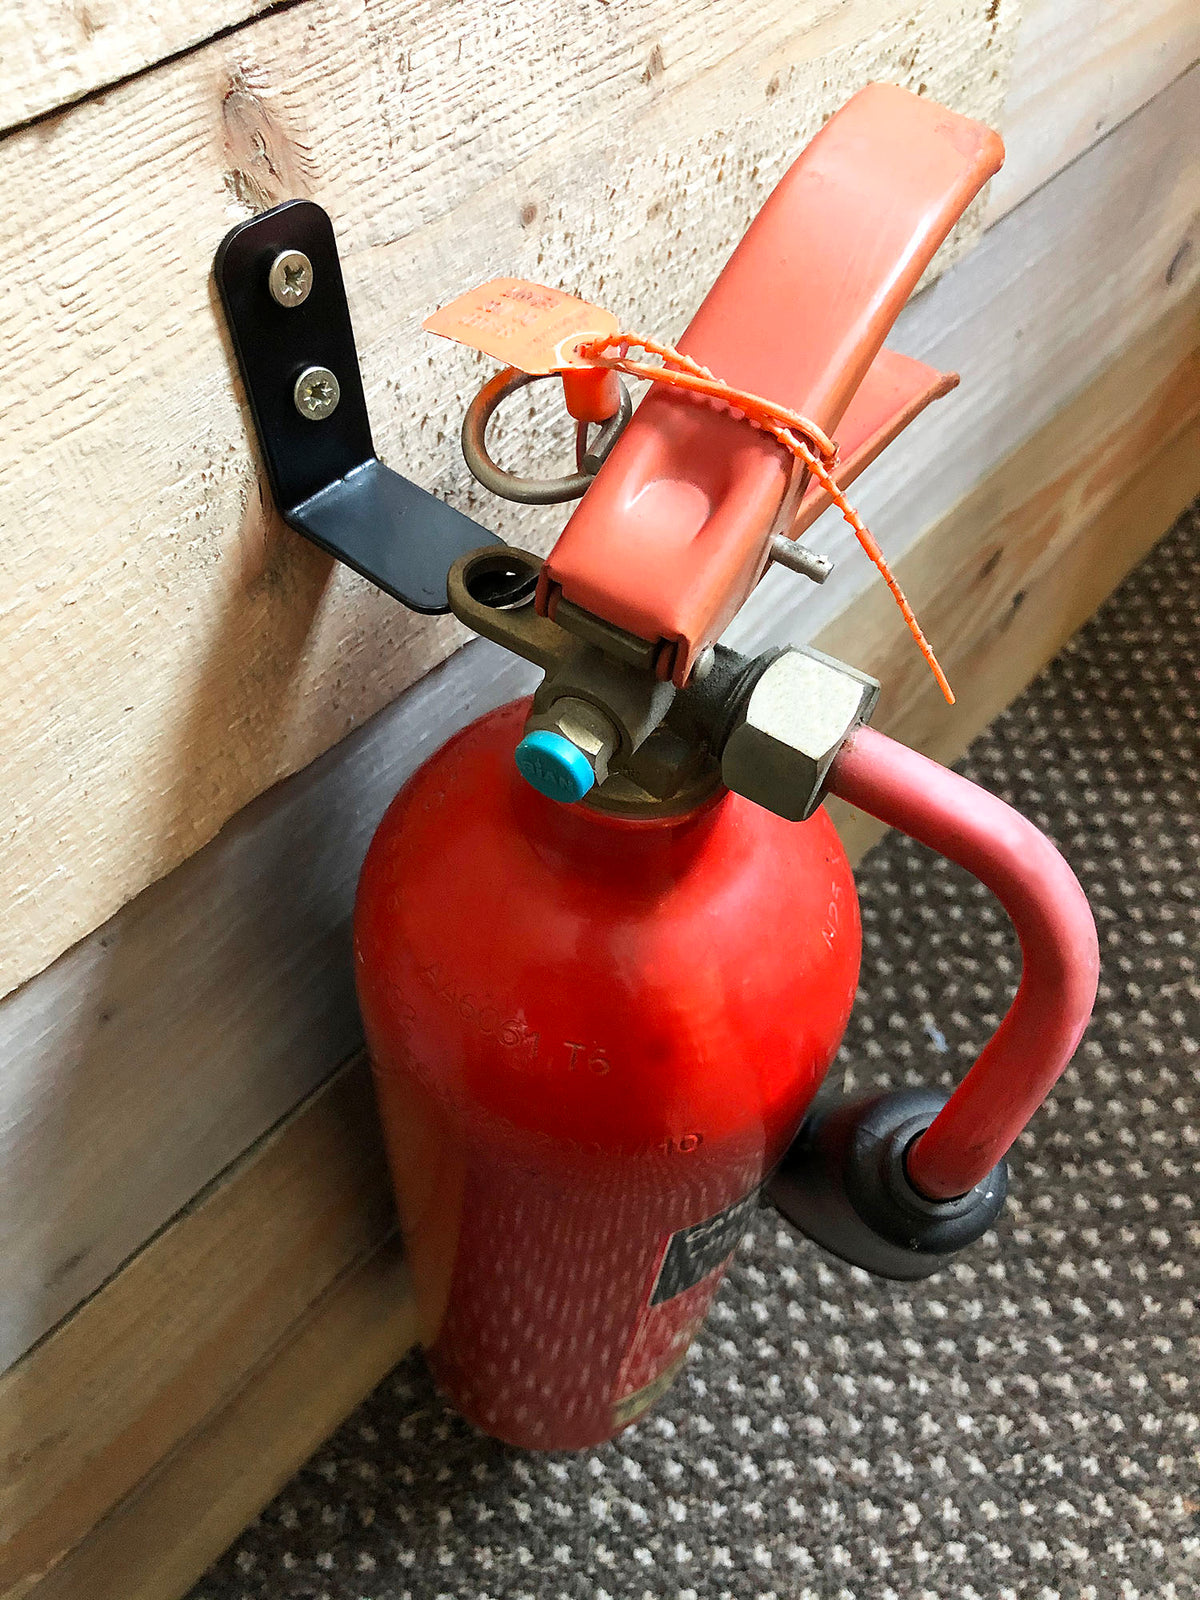 Wall Mount Fire Extinguisher Bracket installed in an office setting